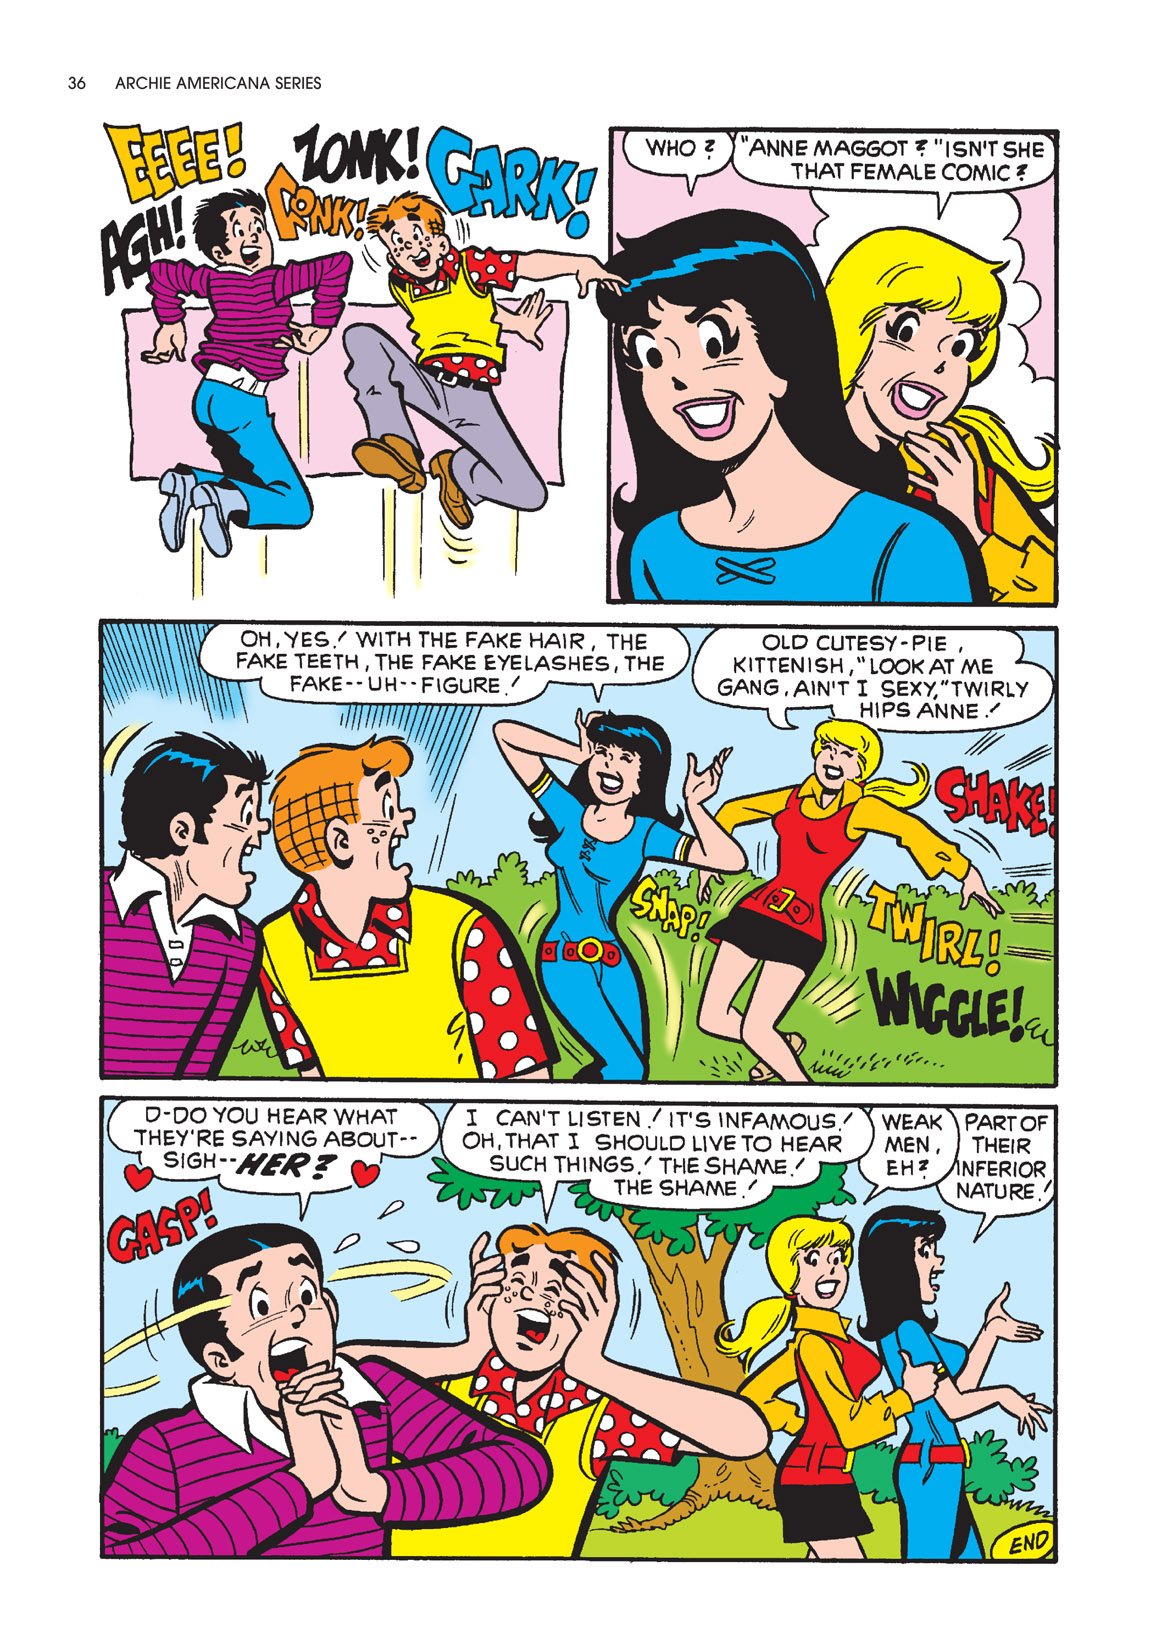 Read online Archie Americana Series comic -  Issue # TPB 10 - 37